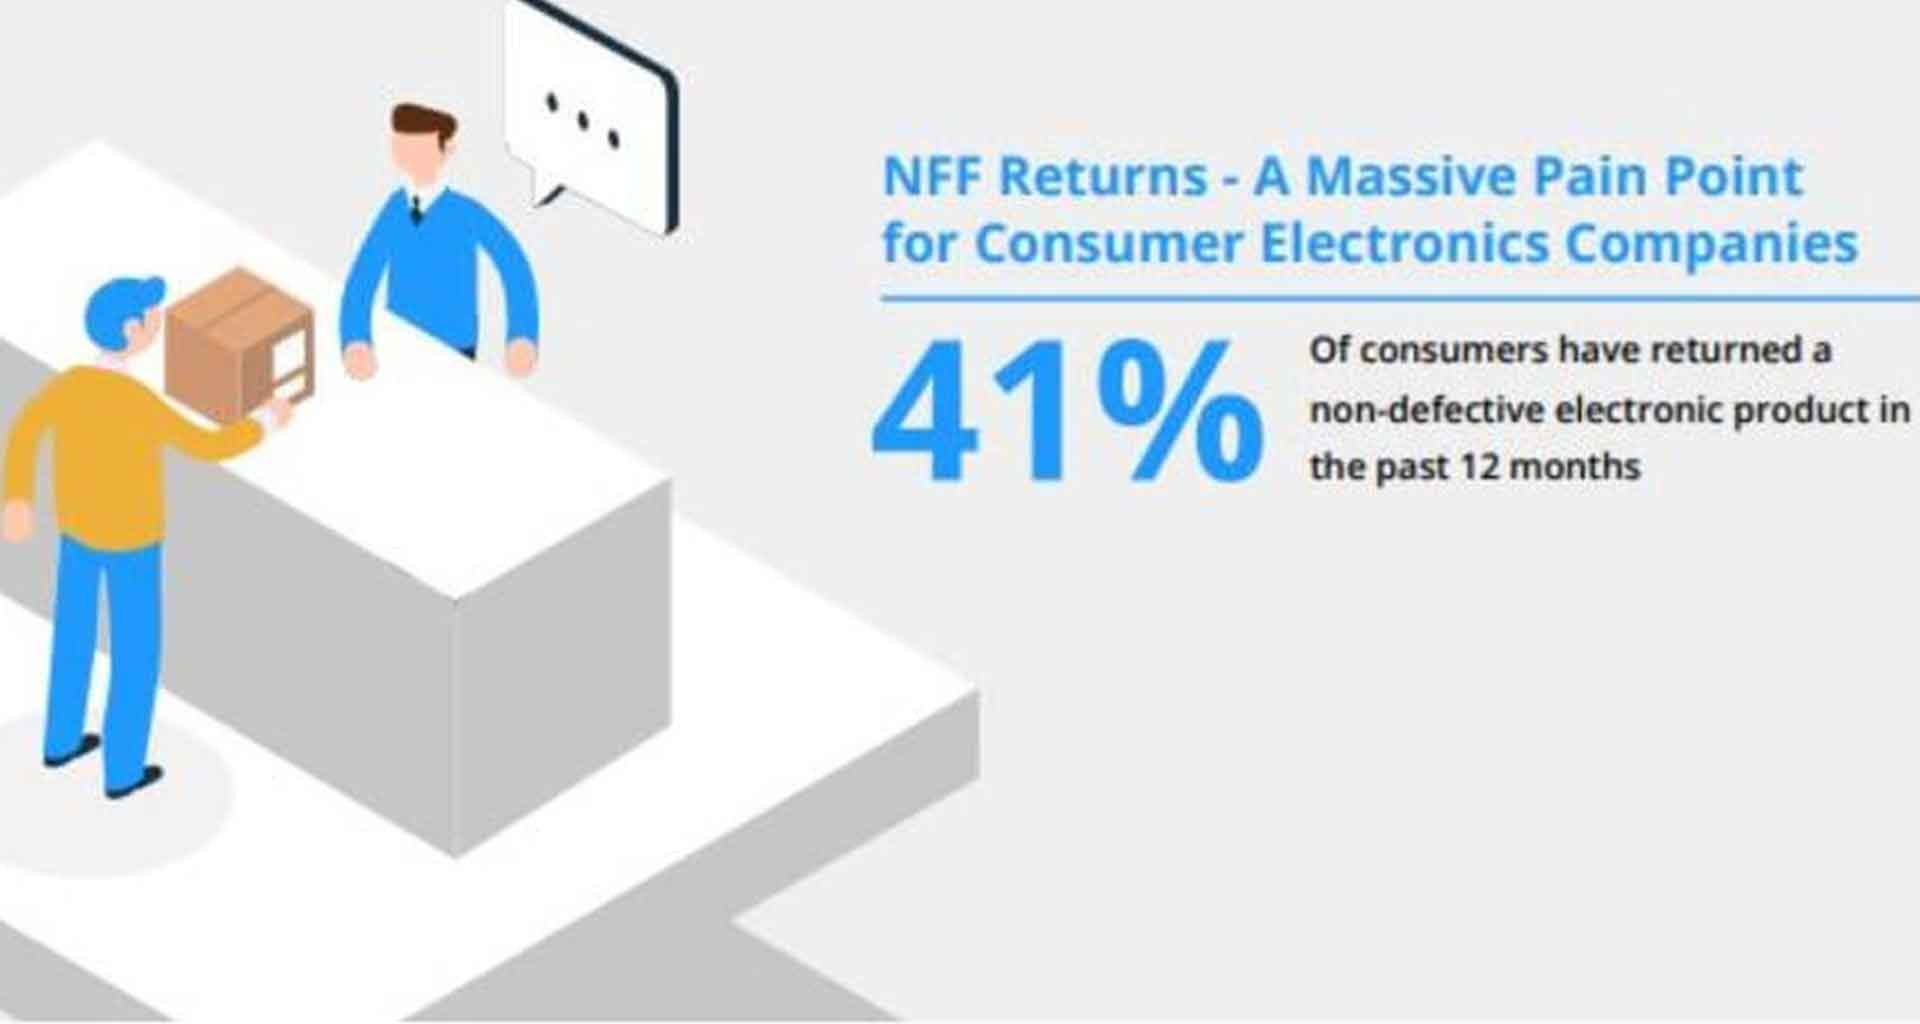 Consumer Electronics Return Rates - How To Reduce and Prevent NFF Returns: A Survey